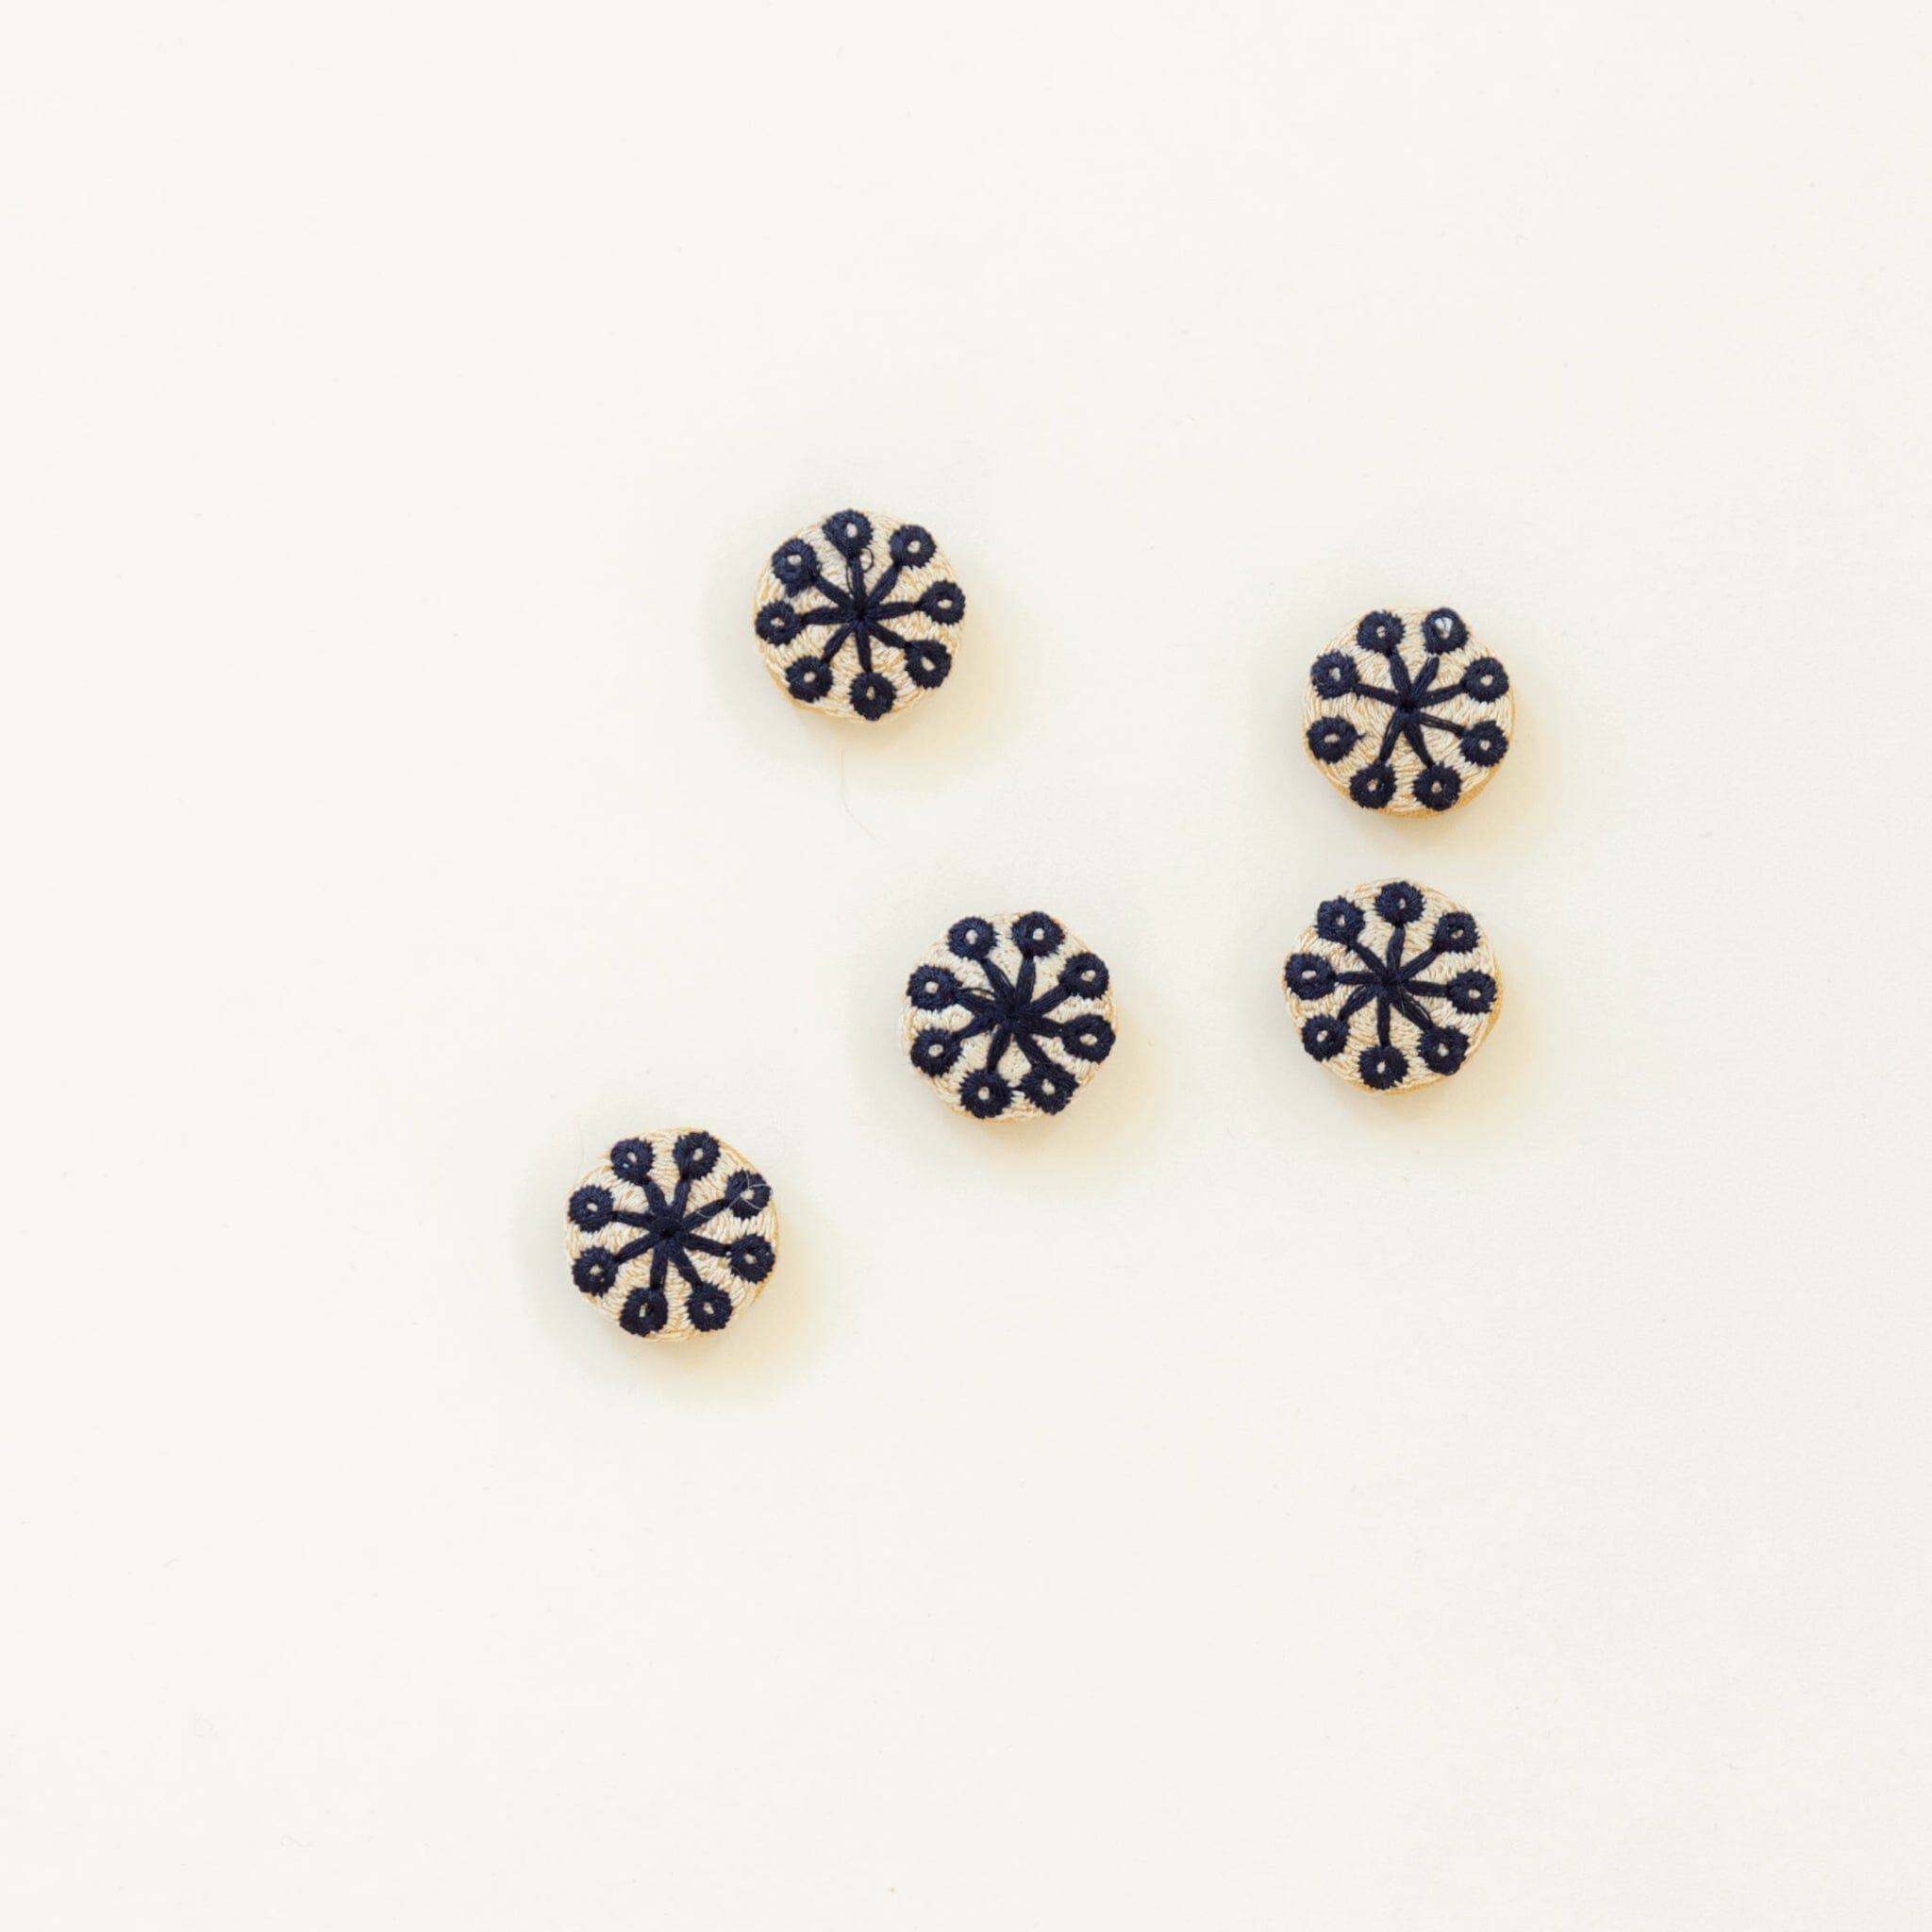 Embroidered Buttons (set of 5) in Tools - notions | String Theory Yarn Co